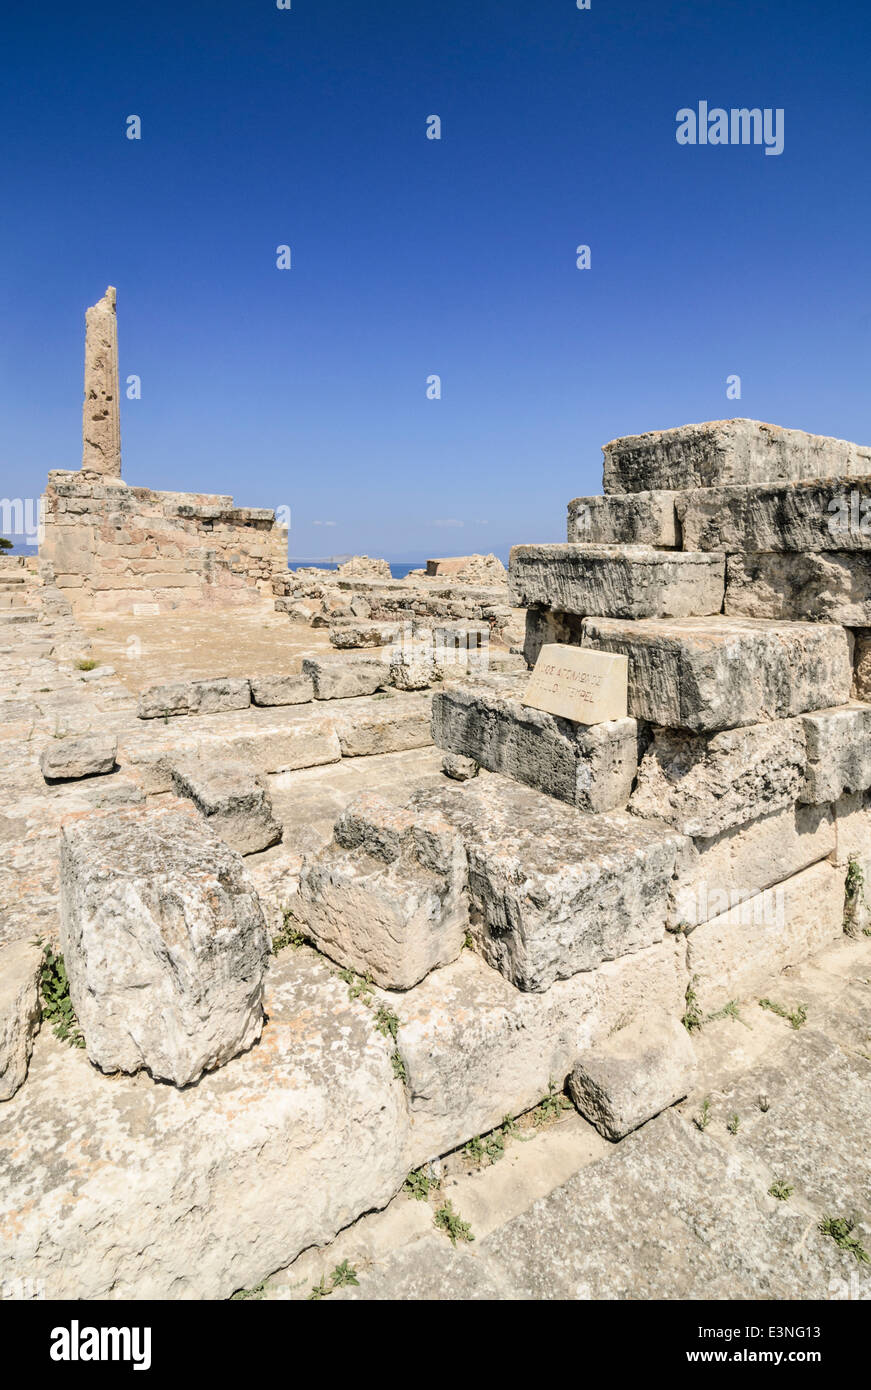 The Temple of Apollo ruins on the ancient site of the Hill of Koloni, Aegina Island, Greece Stock Photo